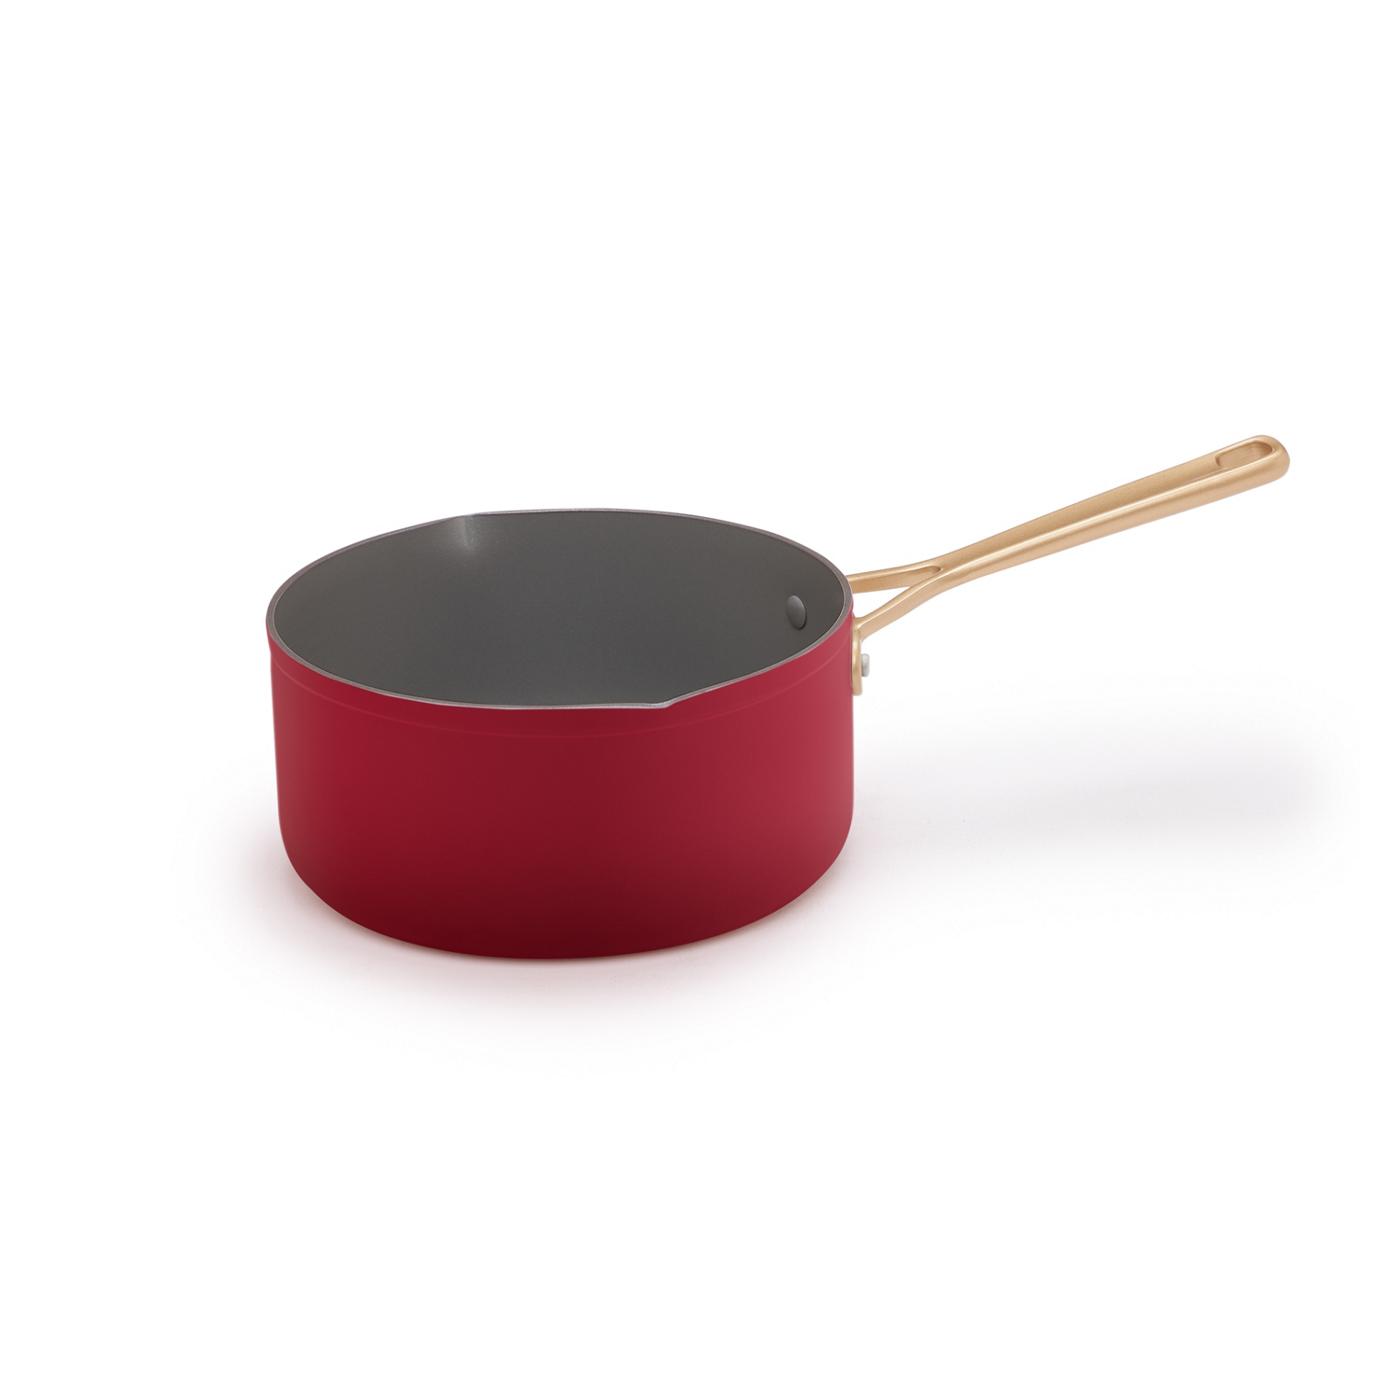 Kitchen & Table by H-E-B Non-Stick Saucepan - Bordeaux Red; image 7 of 7